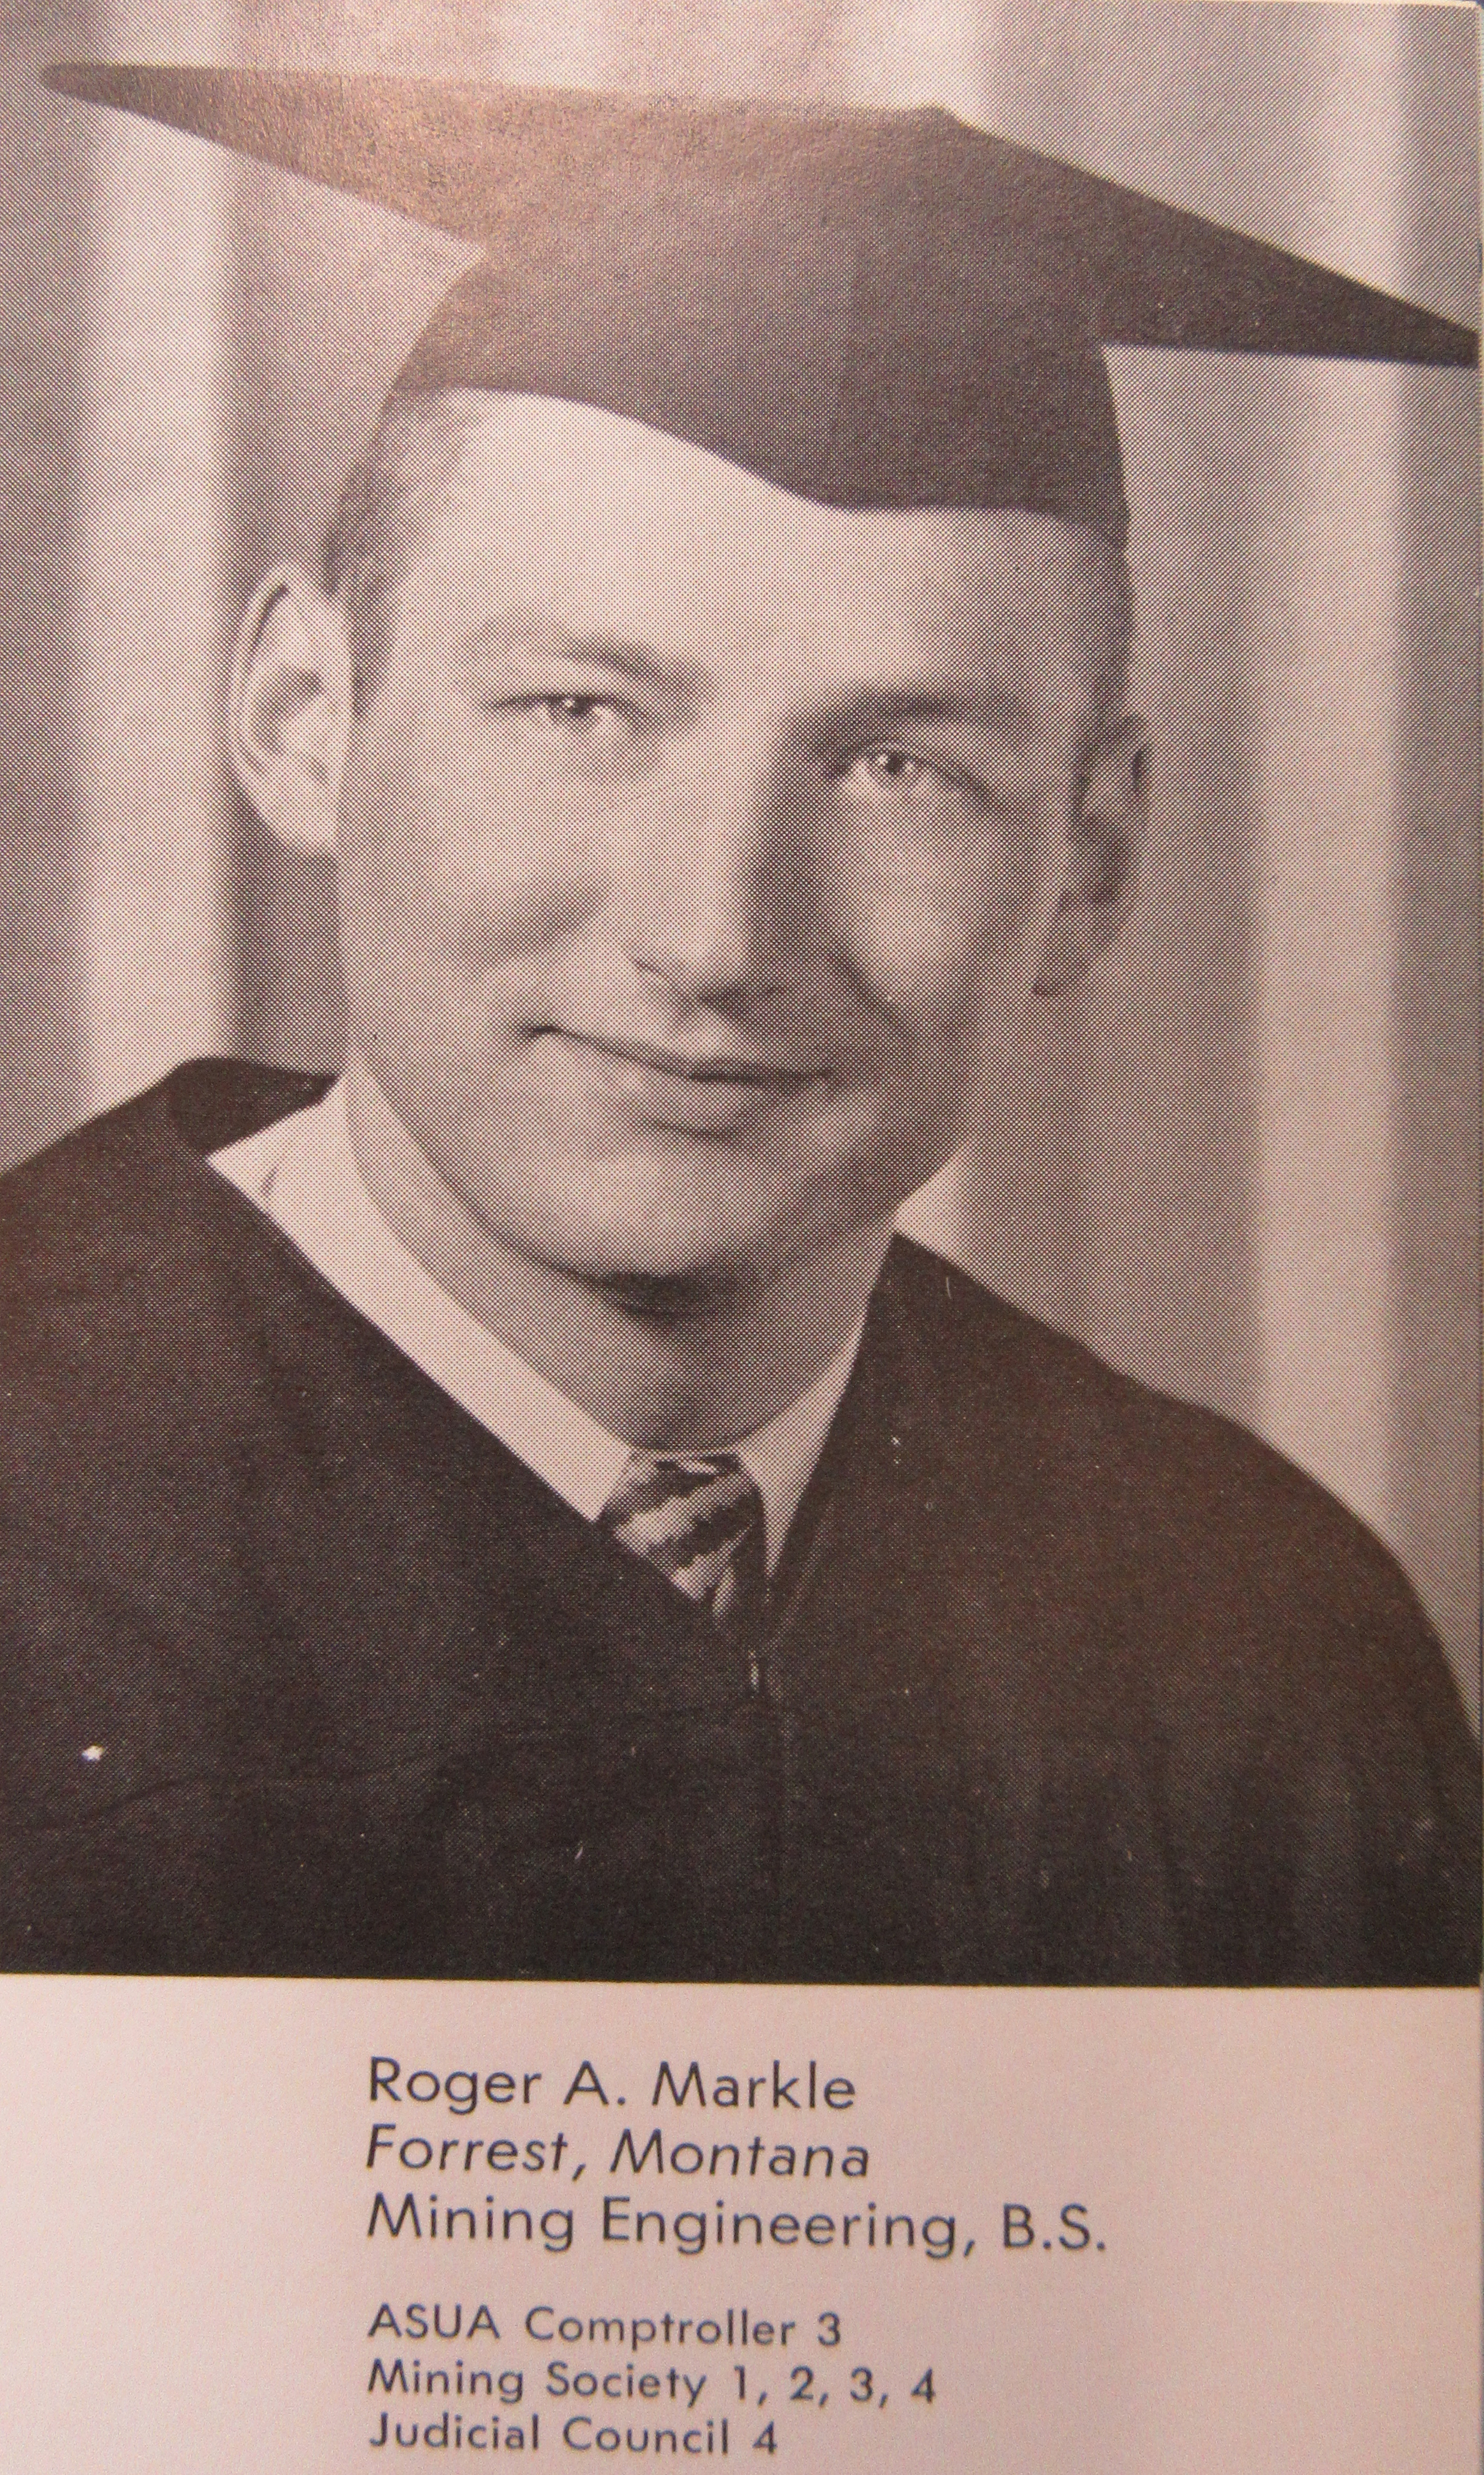 Roger Markle graduation image from yearbook